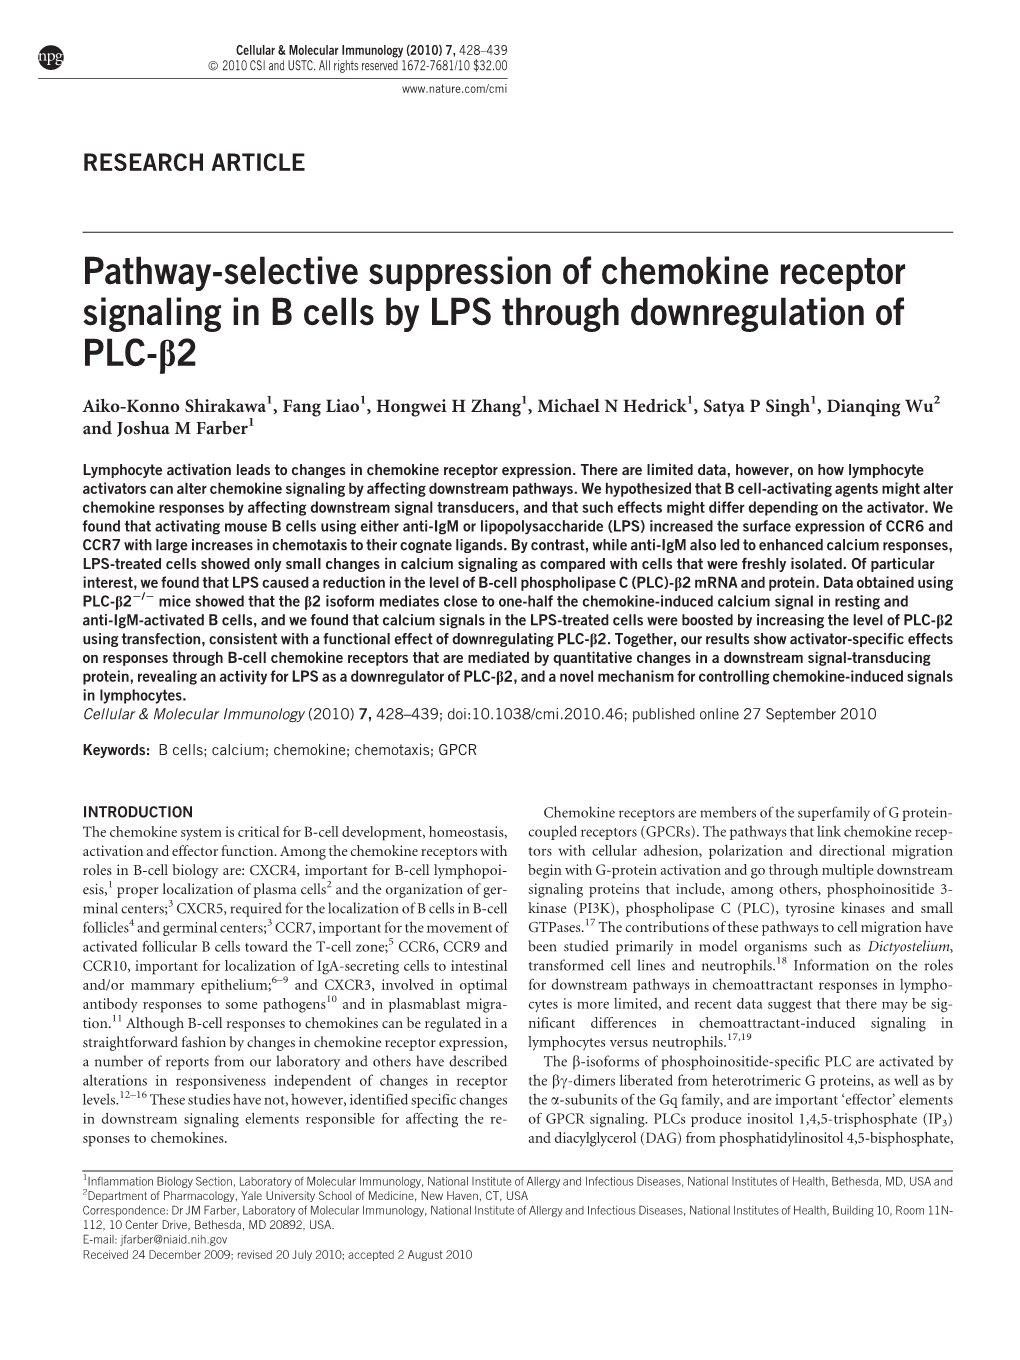 Pathway-Selective Suppression of Chemokine Receptor Signaling in B Cells by LPS Through Downregulation of PLC-B2